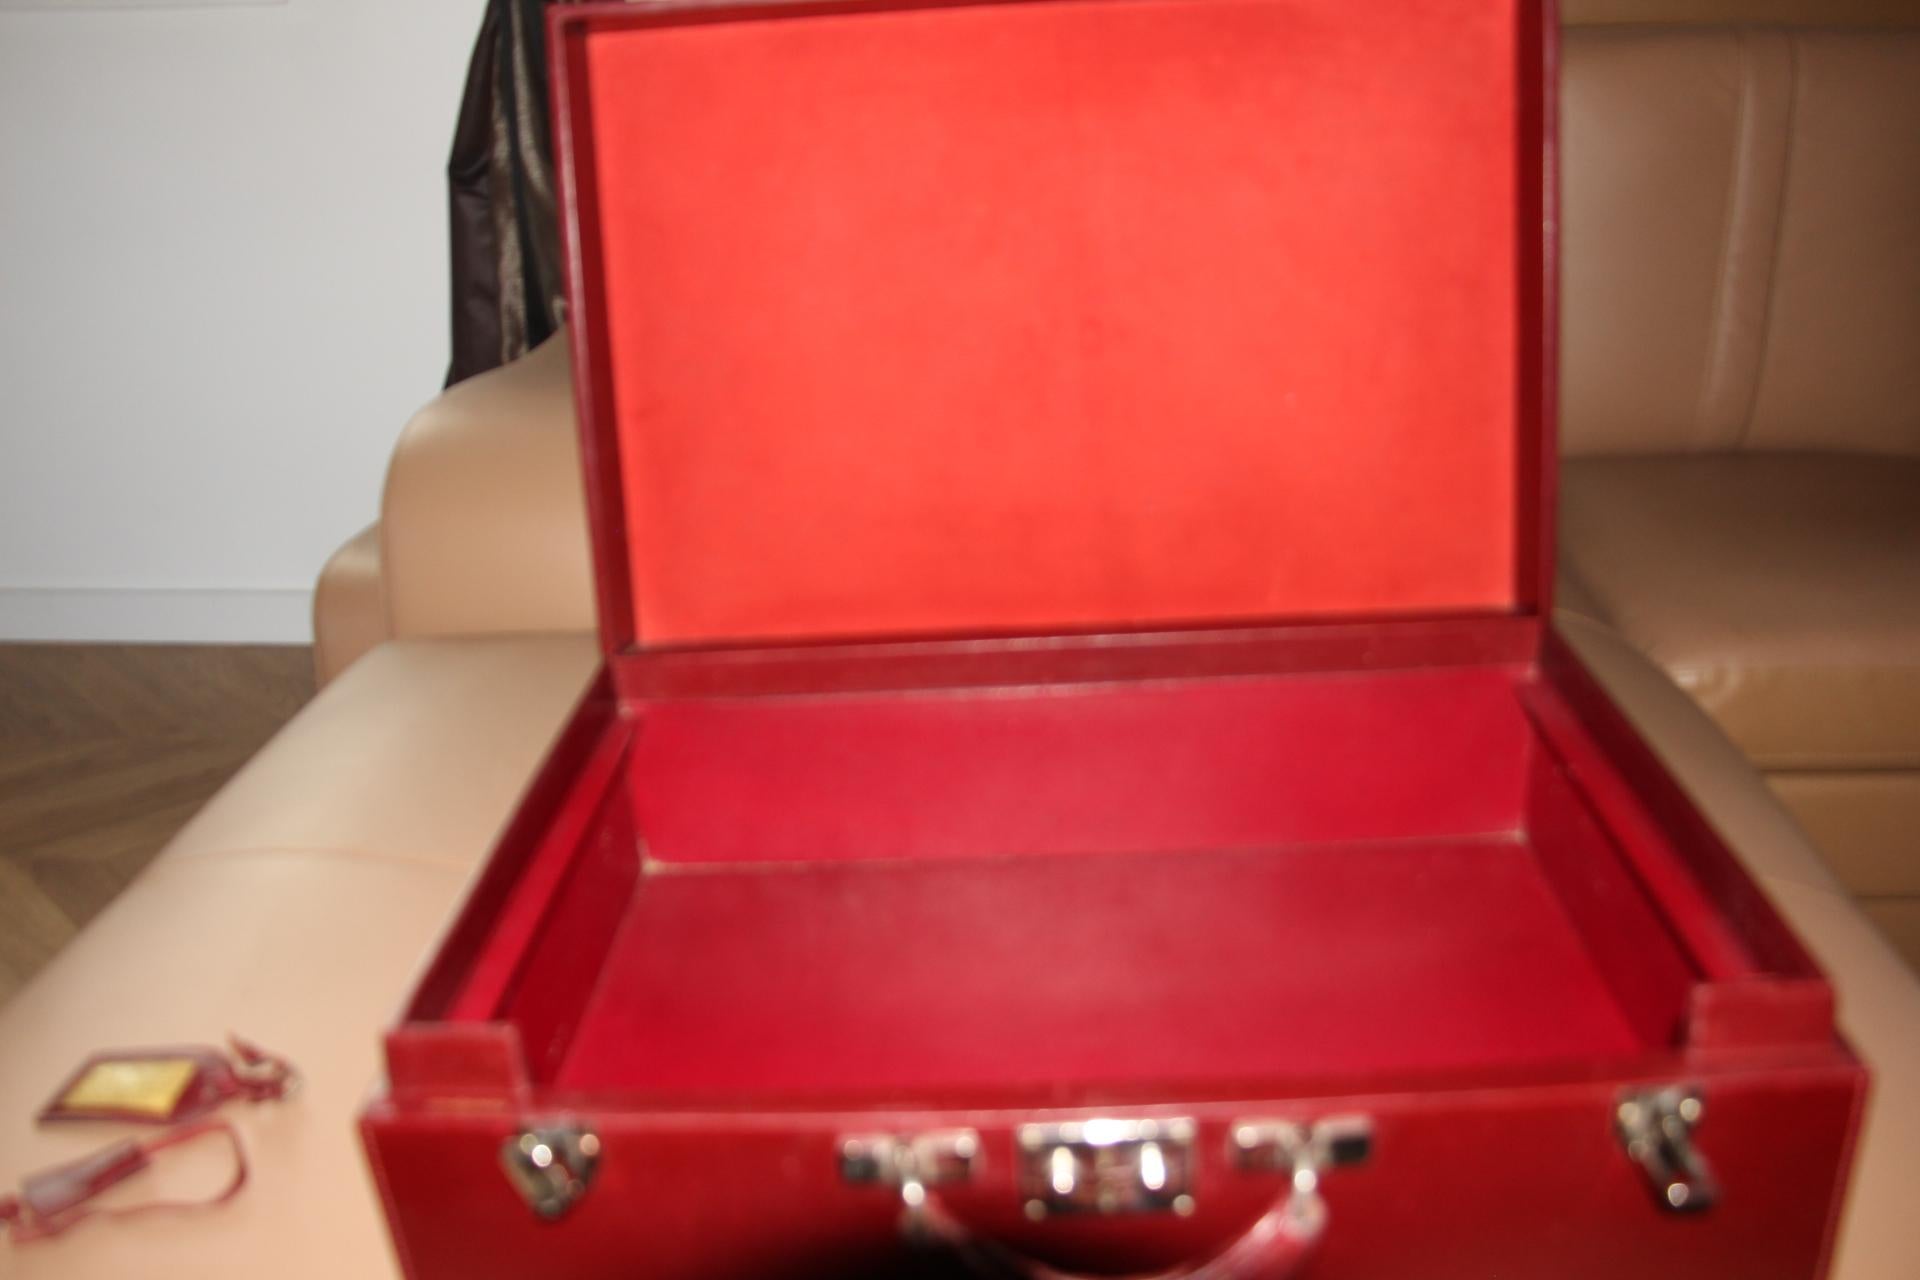 Red Leather Hermes Suitcase 53 cm, Hermes Trunk, Hermes Luggage 11